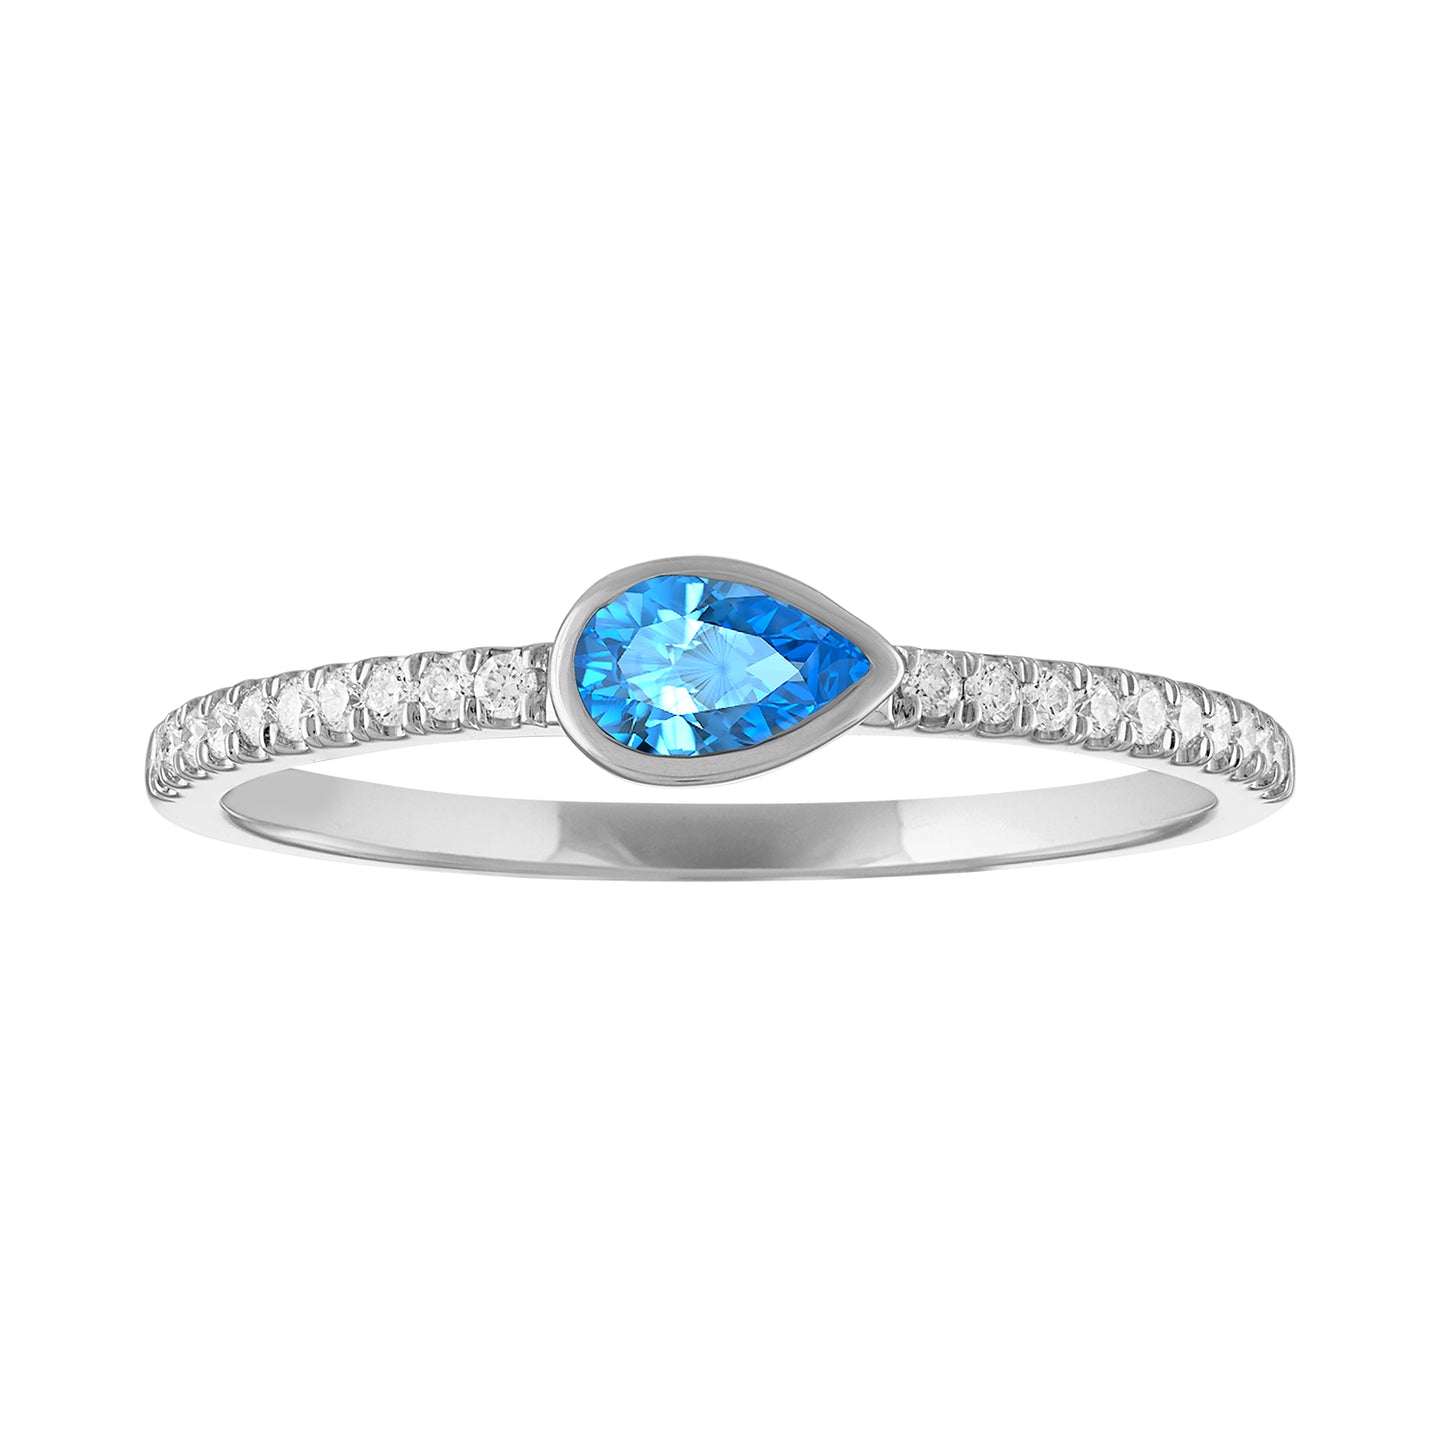 White gold skinny band with a bezeled pear shape blue topaz in the center and round diamonds on the shank. 